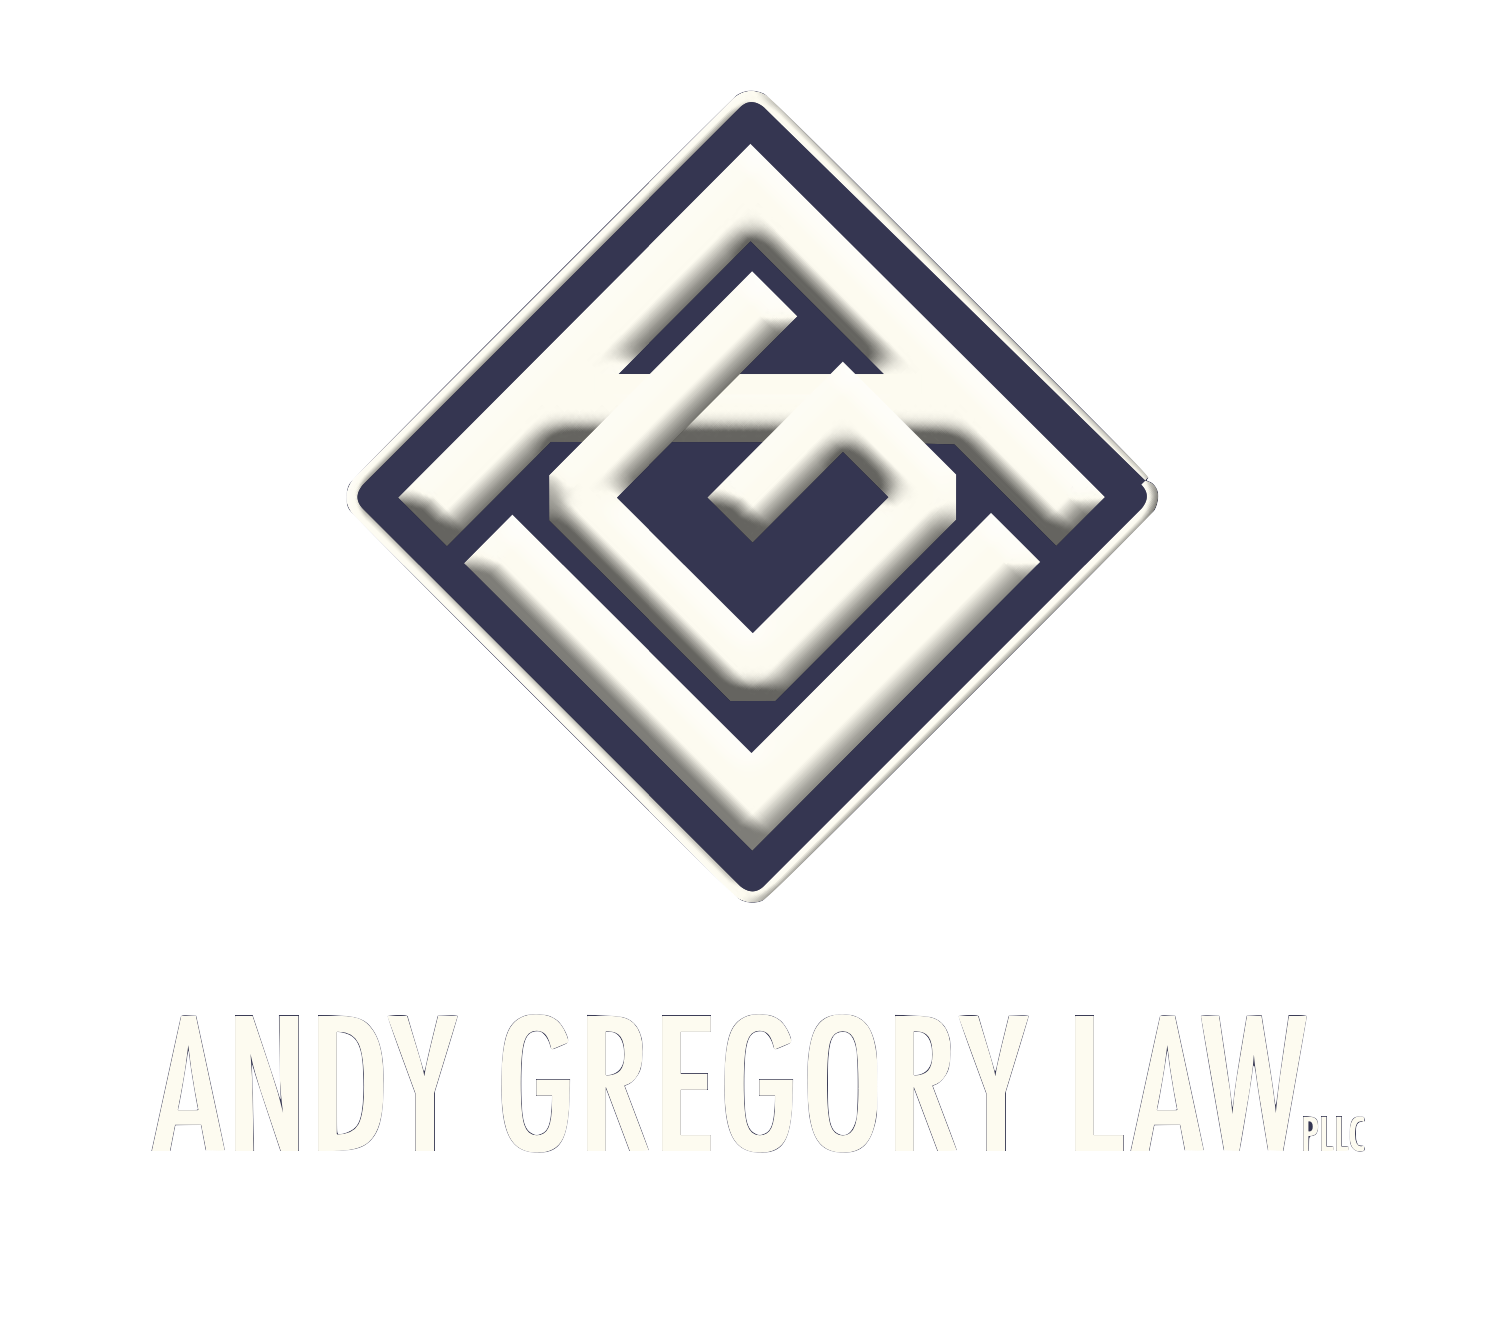 Andy Gregory Law, PLLC